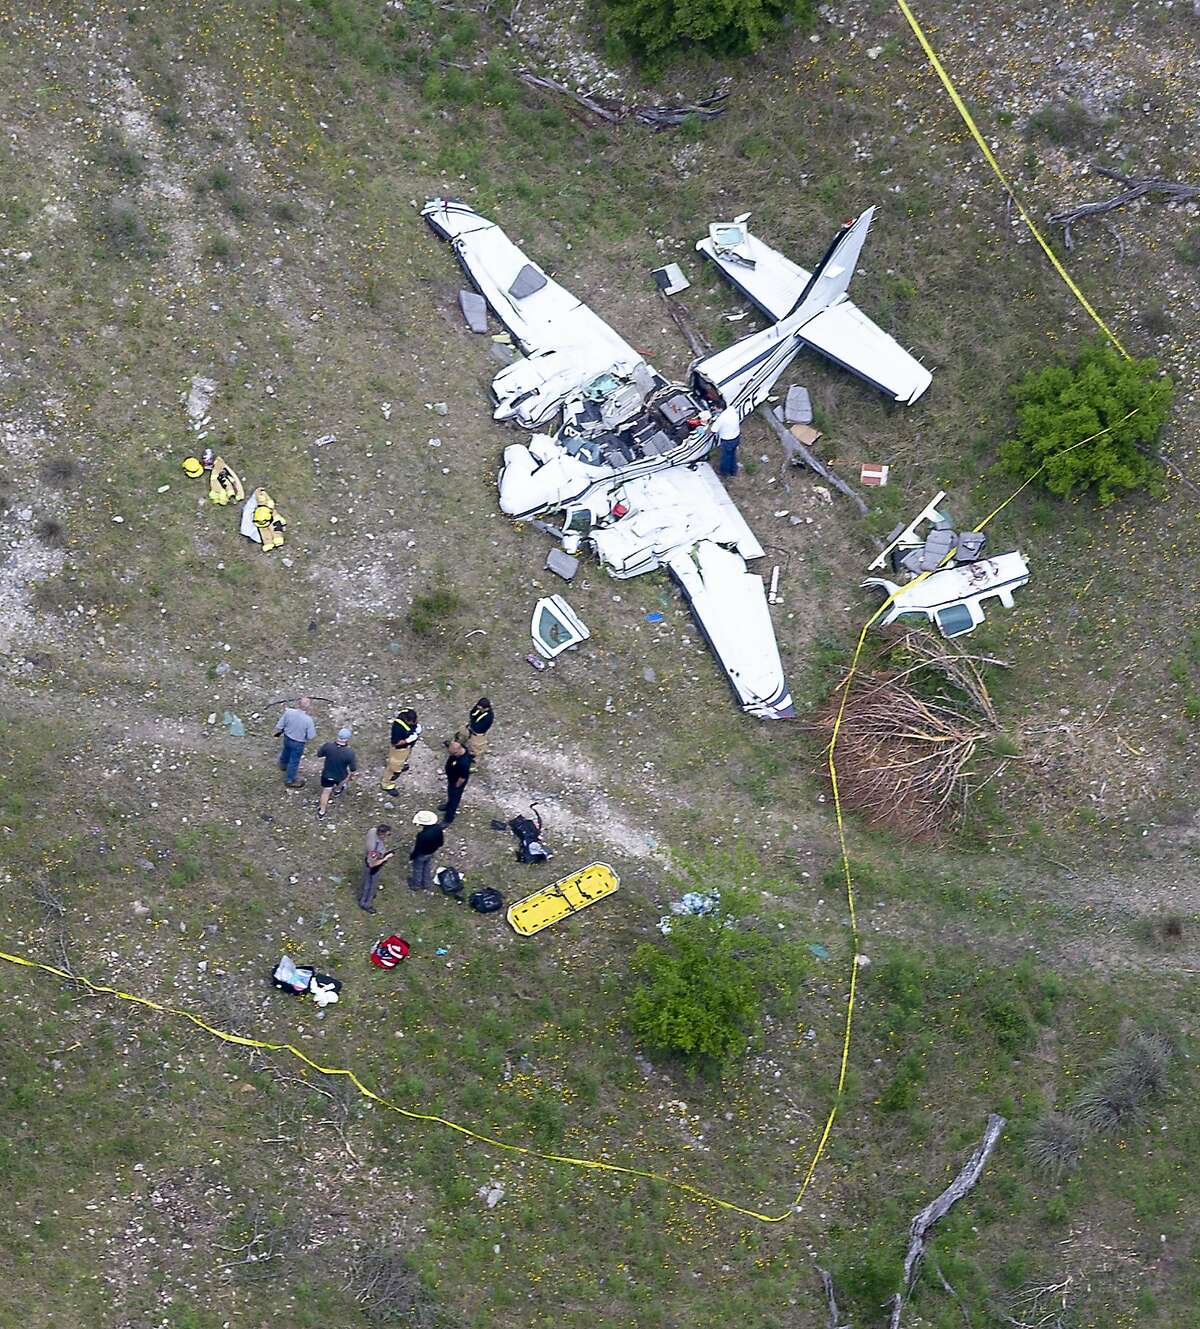 Witnesses say plane was sputtering, flying unusually low before fatal